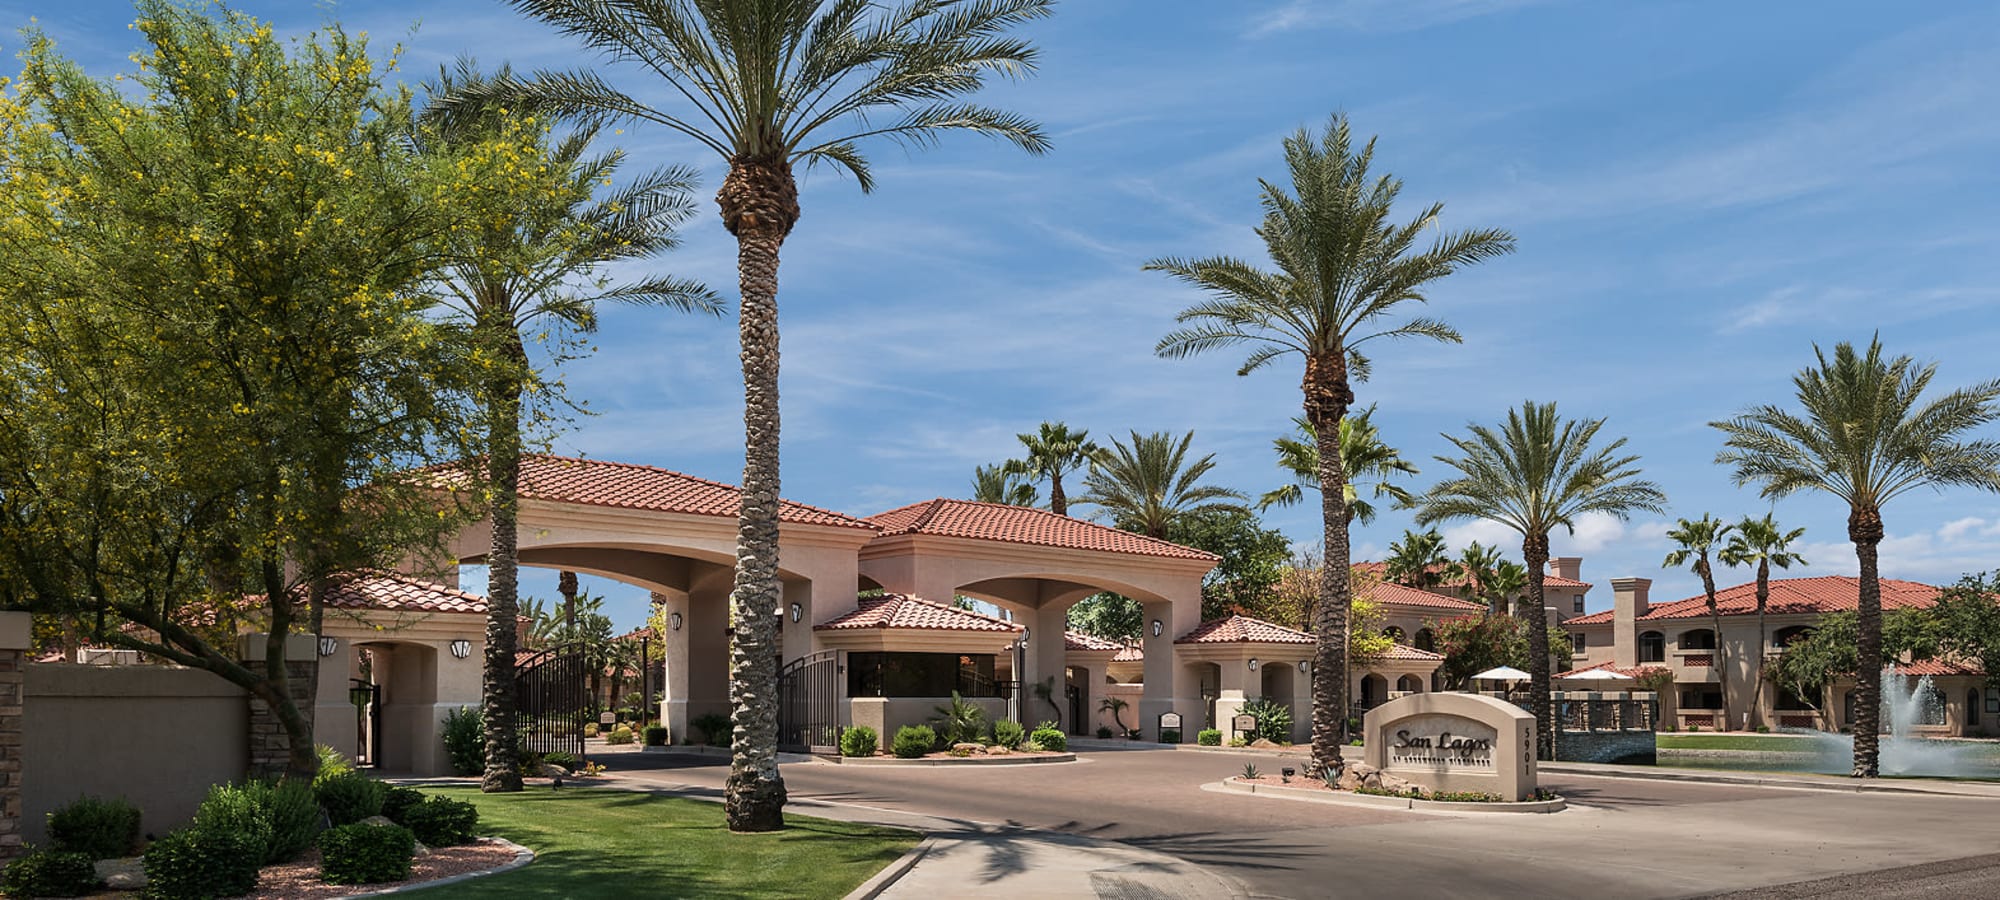 Front entryway to community at San Lagos in Glendale, Arizona